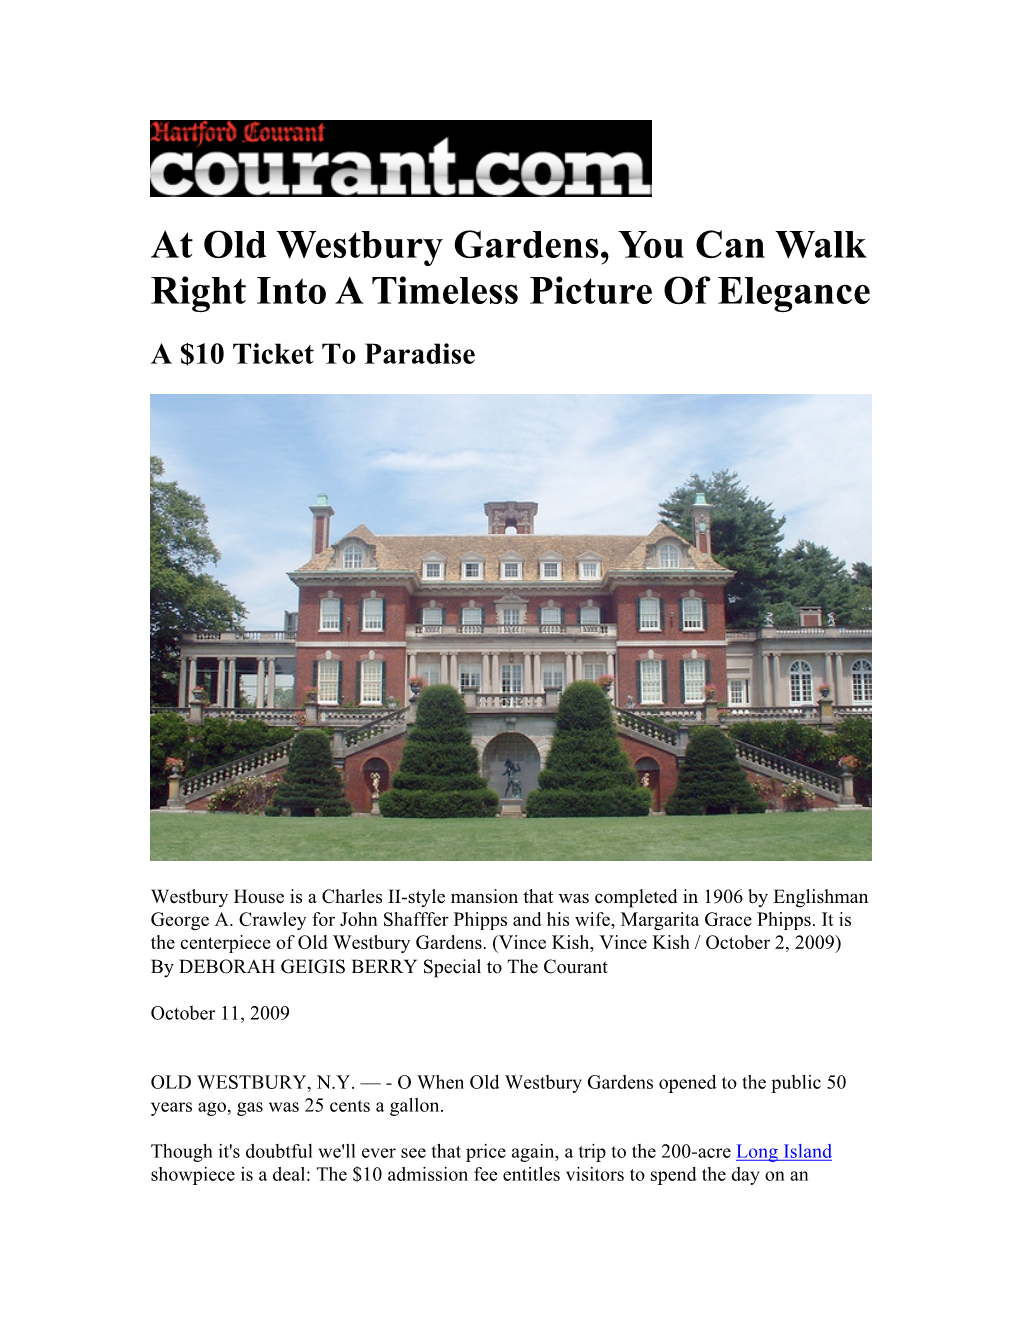 At Old Westbury Gardens, You Can Walk Right Into a Timeless Picture of Elegance a $10 Ticket to Paradise